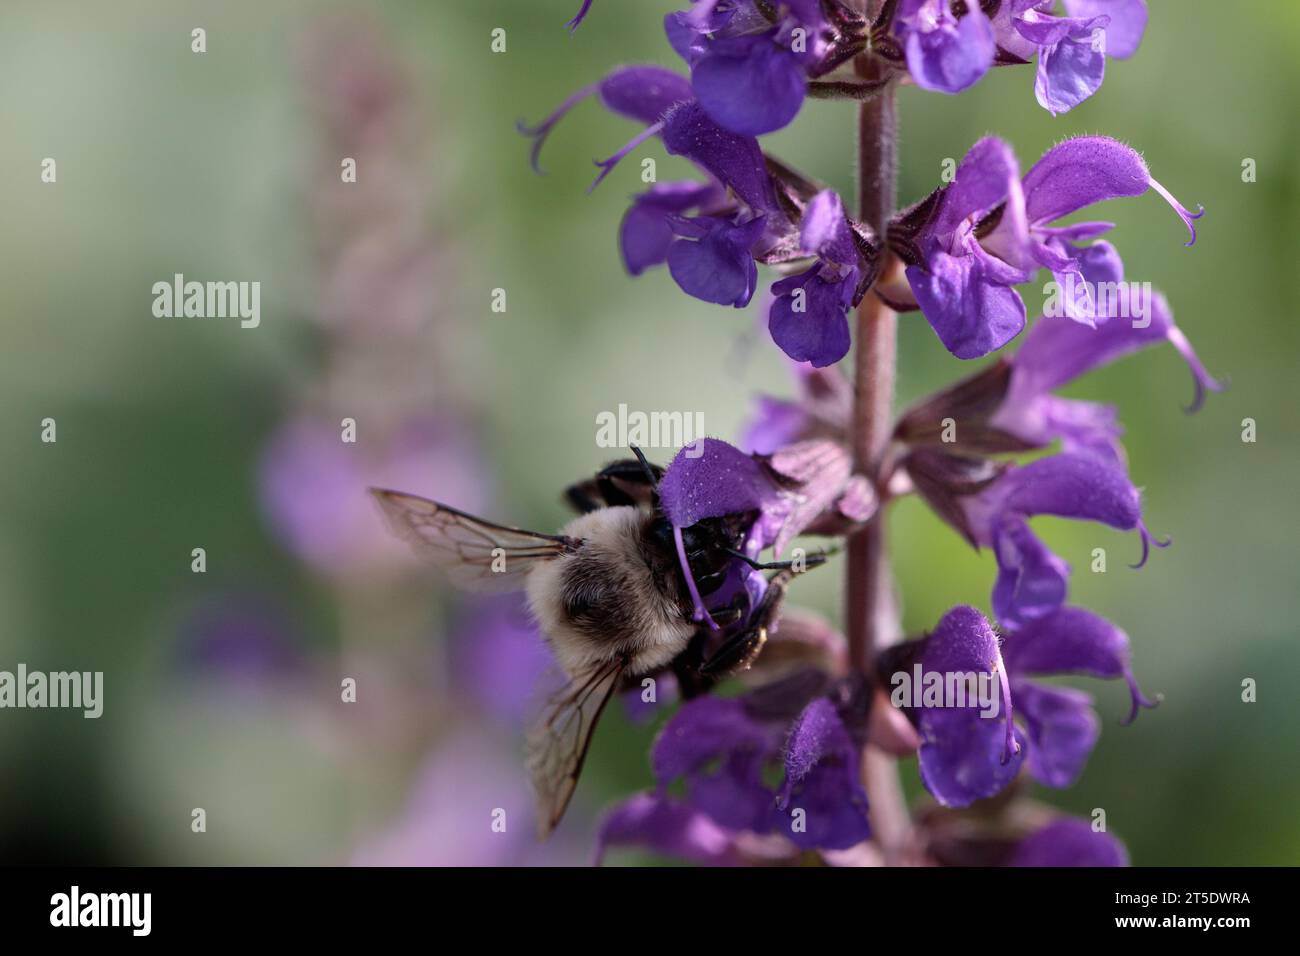 A carpenter bee on purple catmint against a green and purple background Stock Photo